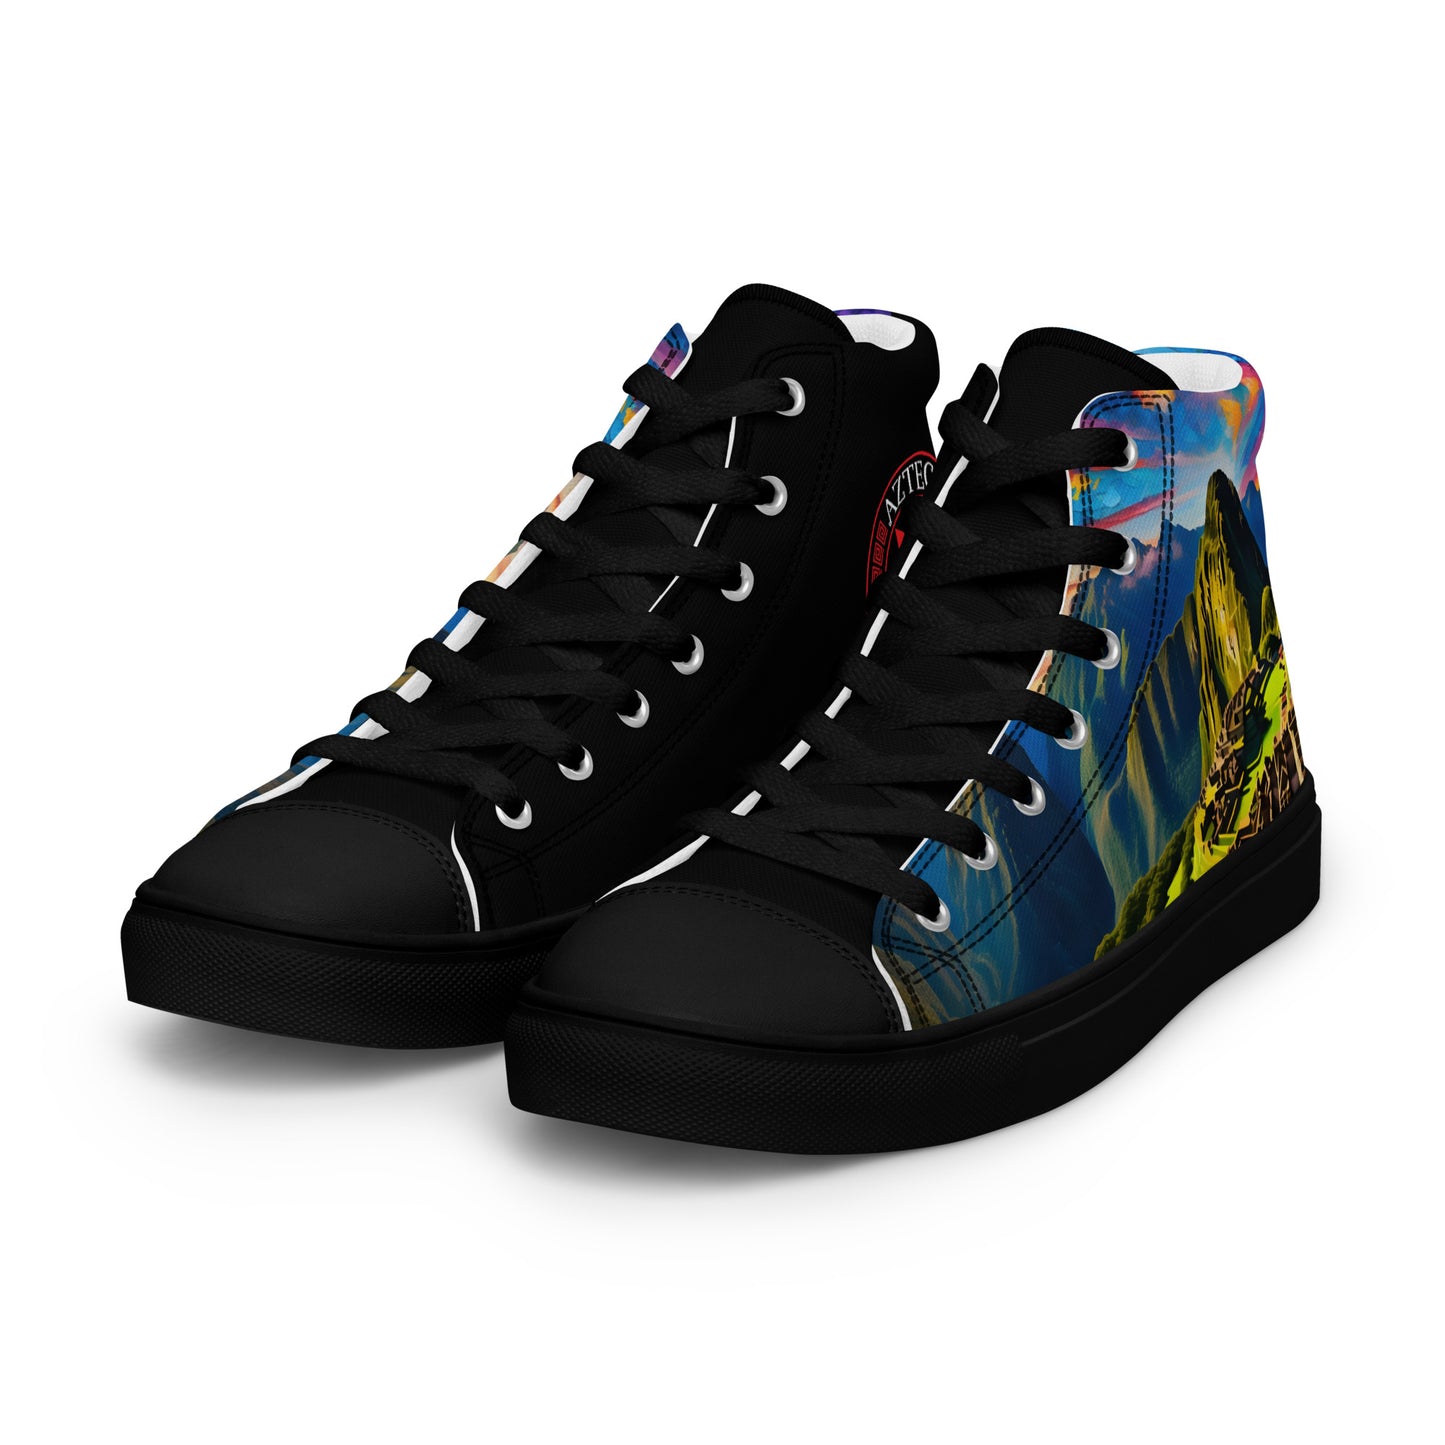 Machu Picchu - Stained glass - Women - Black - High top shoes